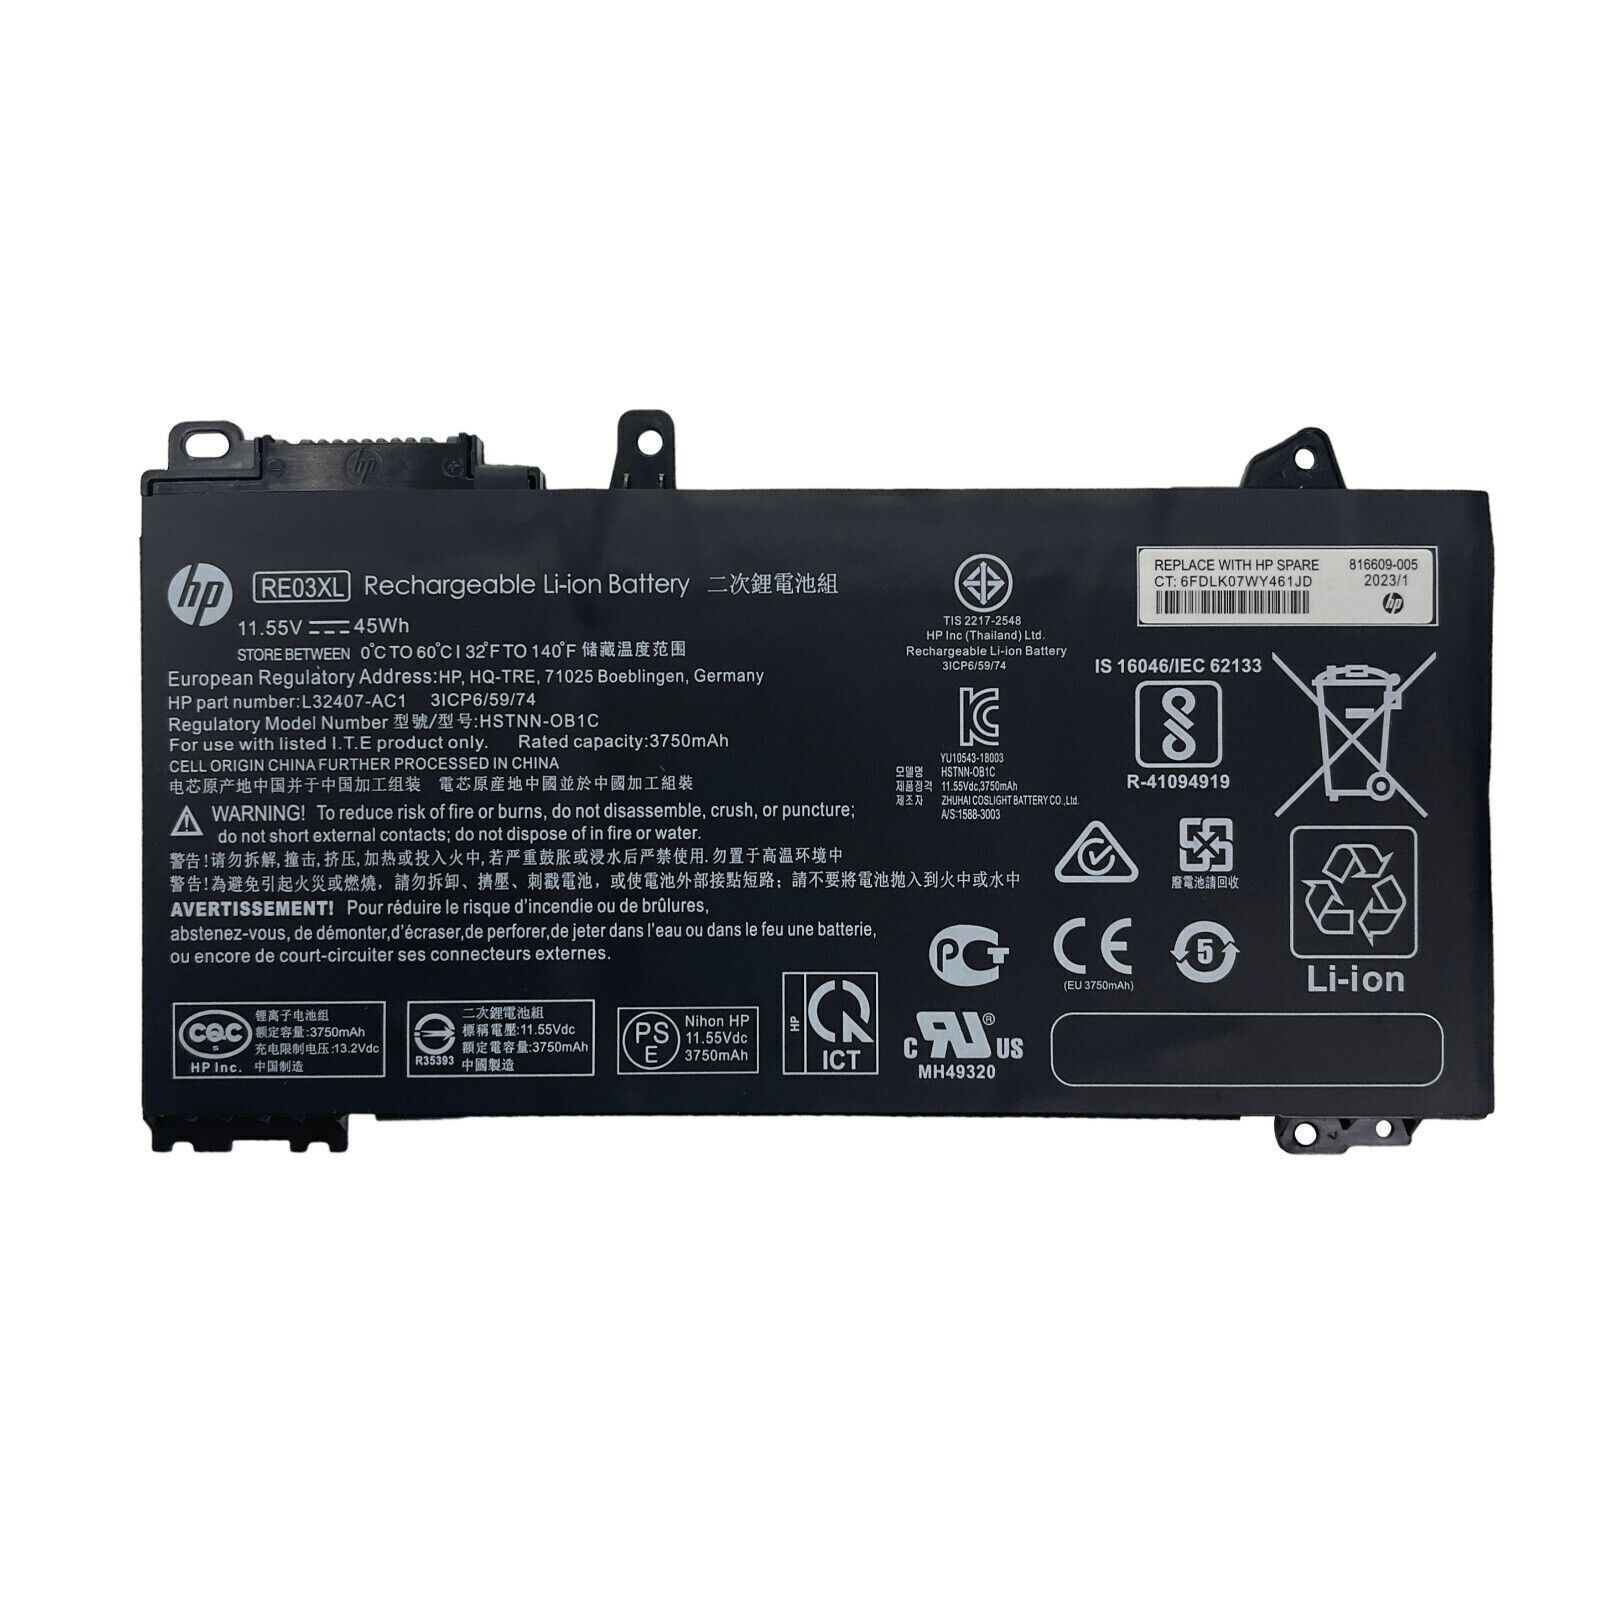 OEM Genuine RE03XL Battery for HP ProBook 430 440 445 450 455 455R G6 L32407-AC1